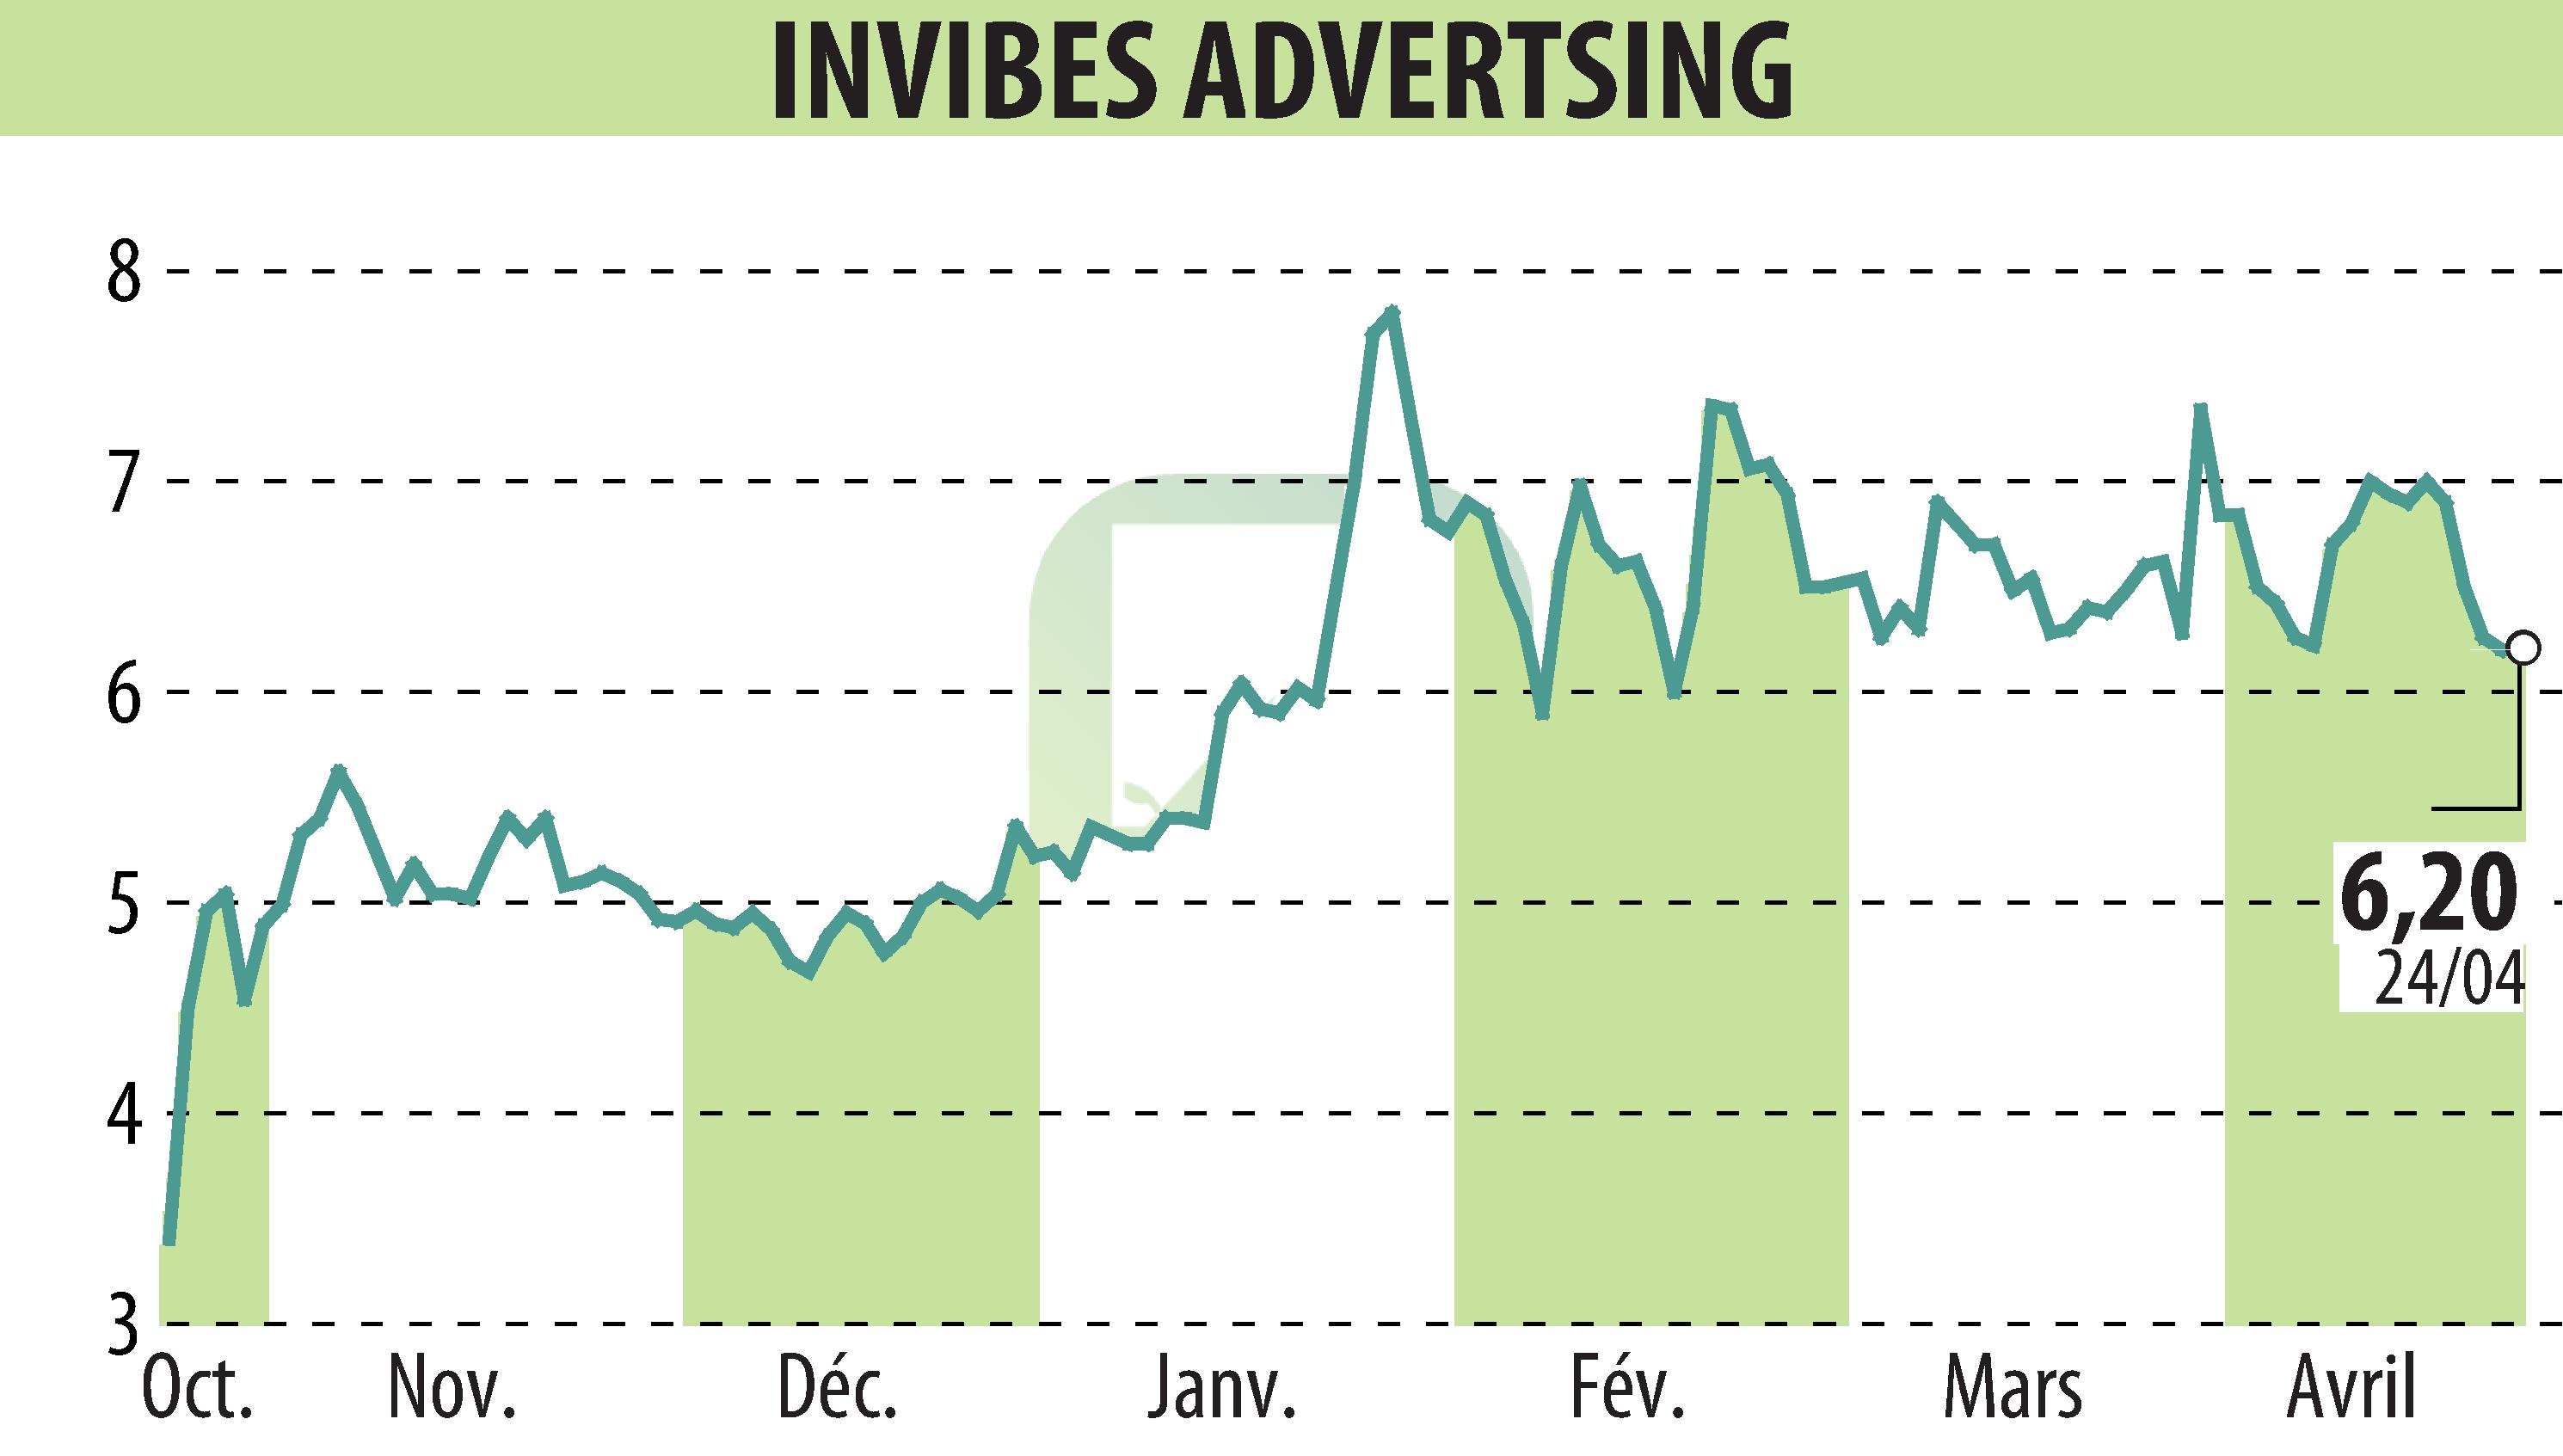 Stock price chart of INVIBES ADVERTSING (EPA:ALINV) showing fluctuations.